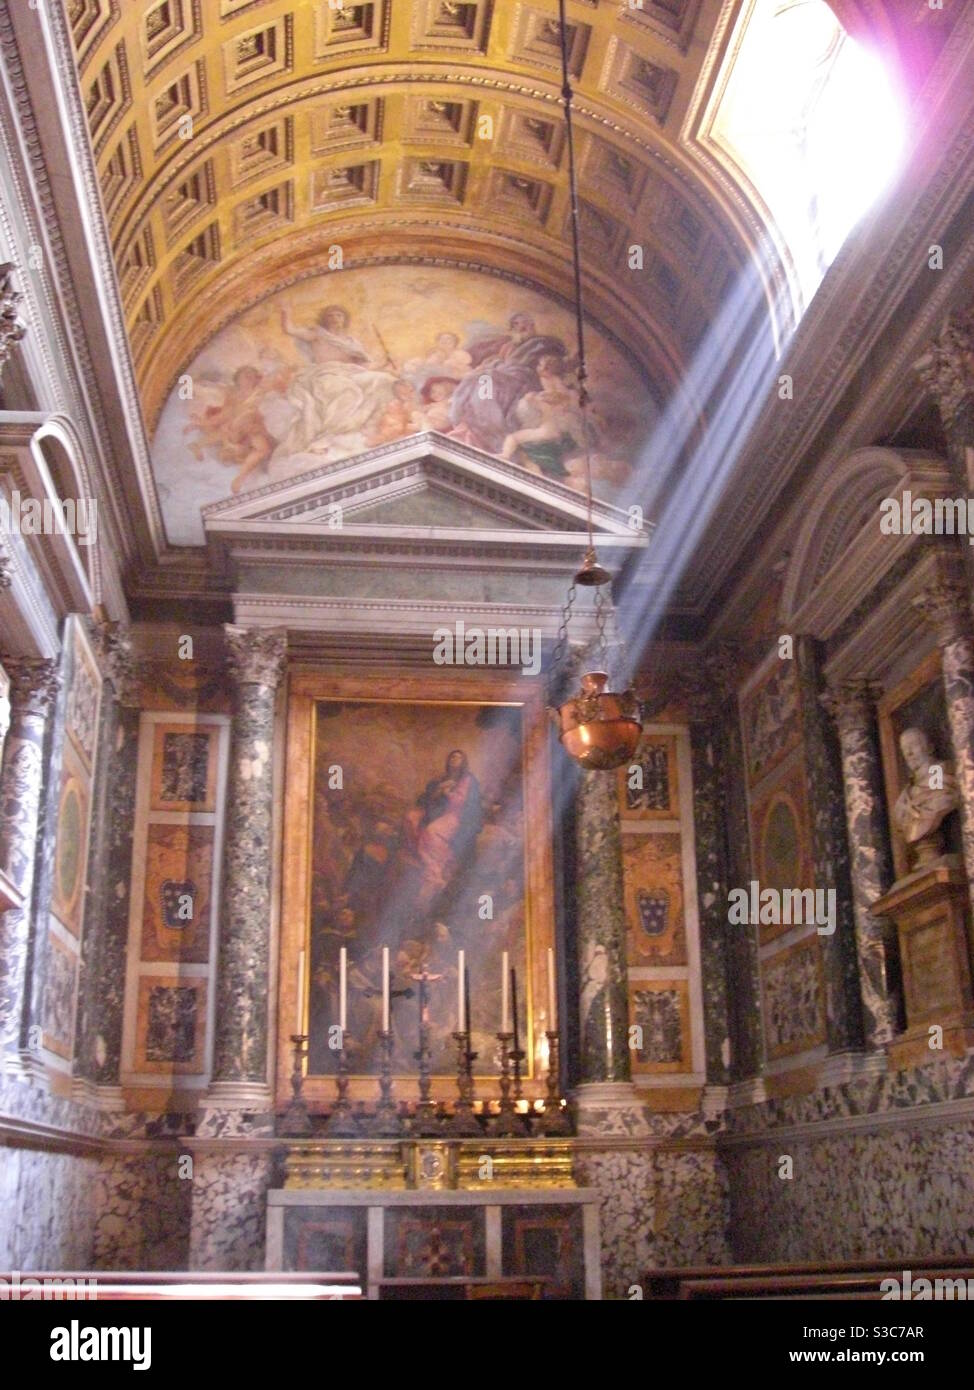 Beam of sunlight streaming through window into incense-filled beautiful catholic cathedral in Rome, Italy Stock Photo